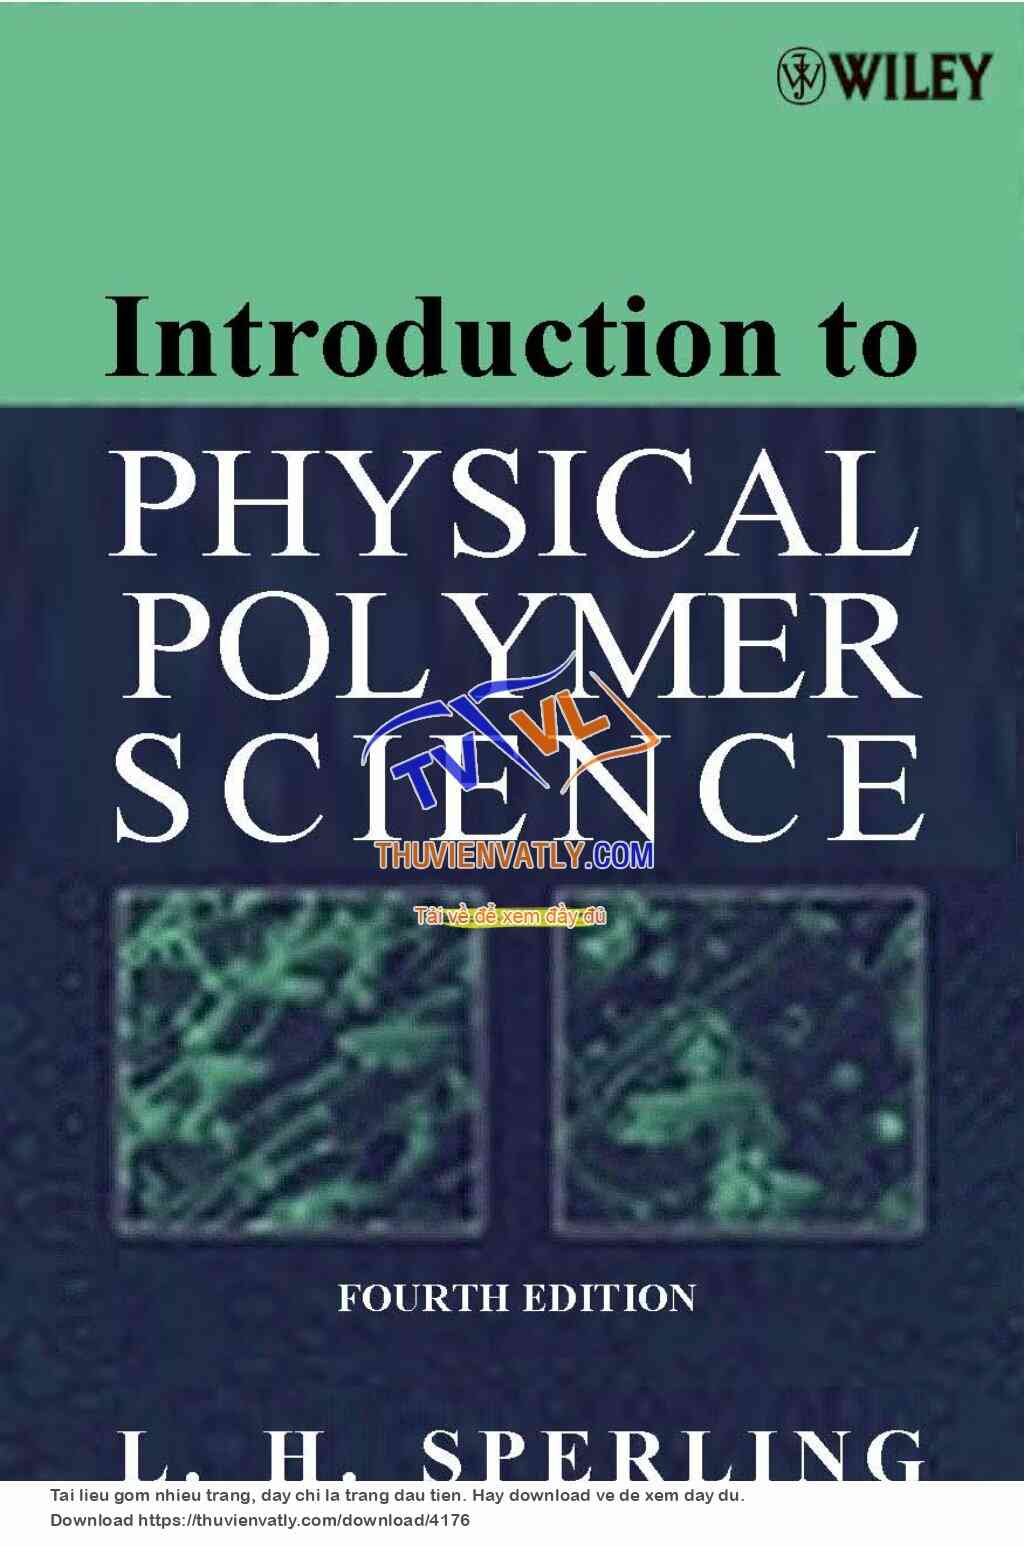 Introduction to Physical Polymer Science